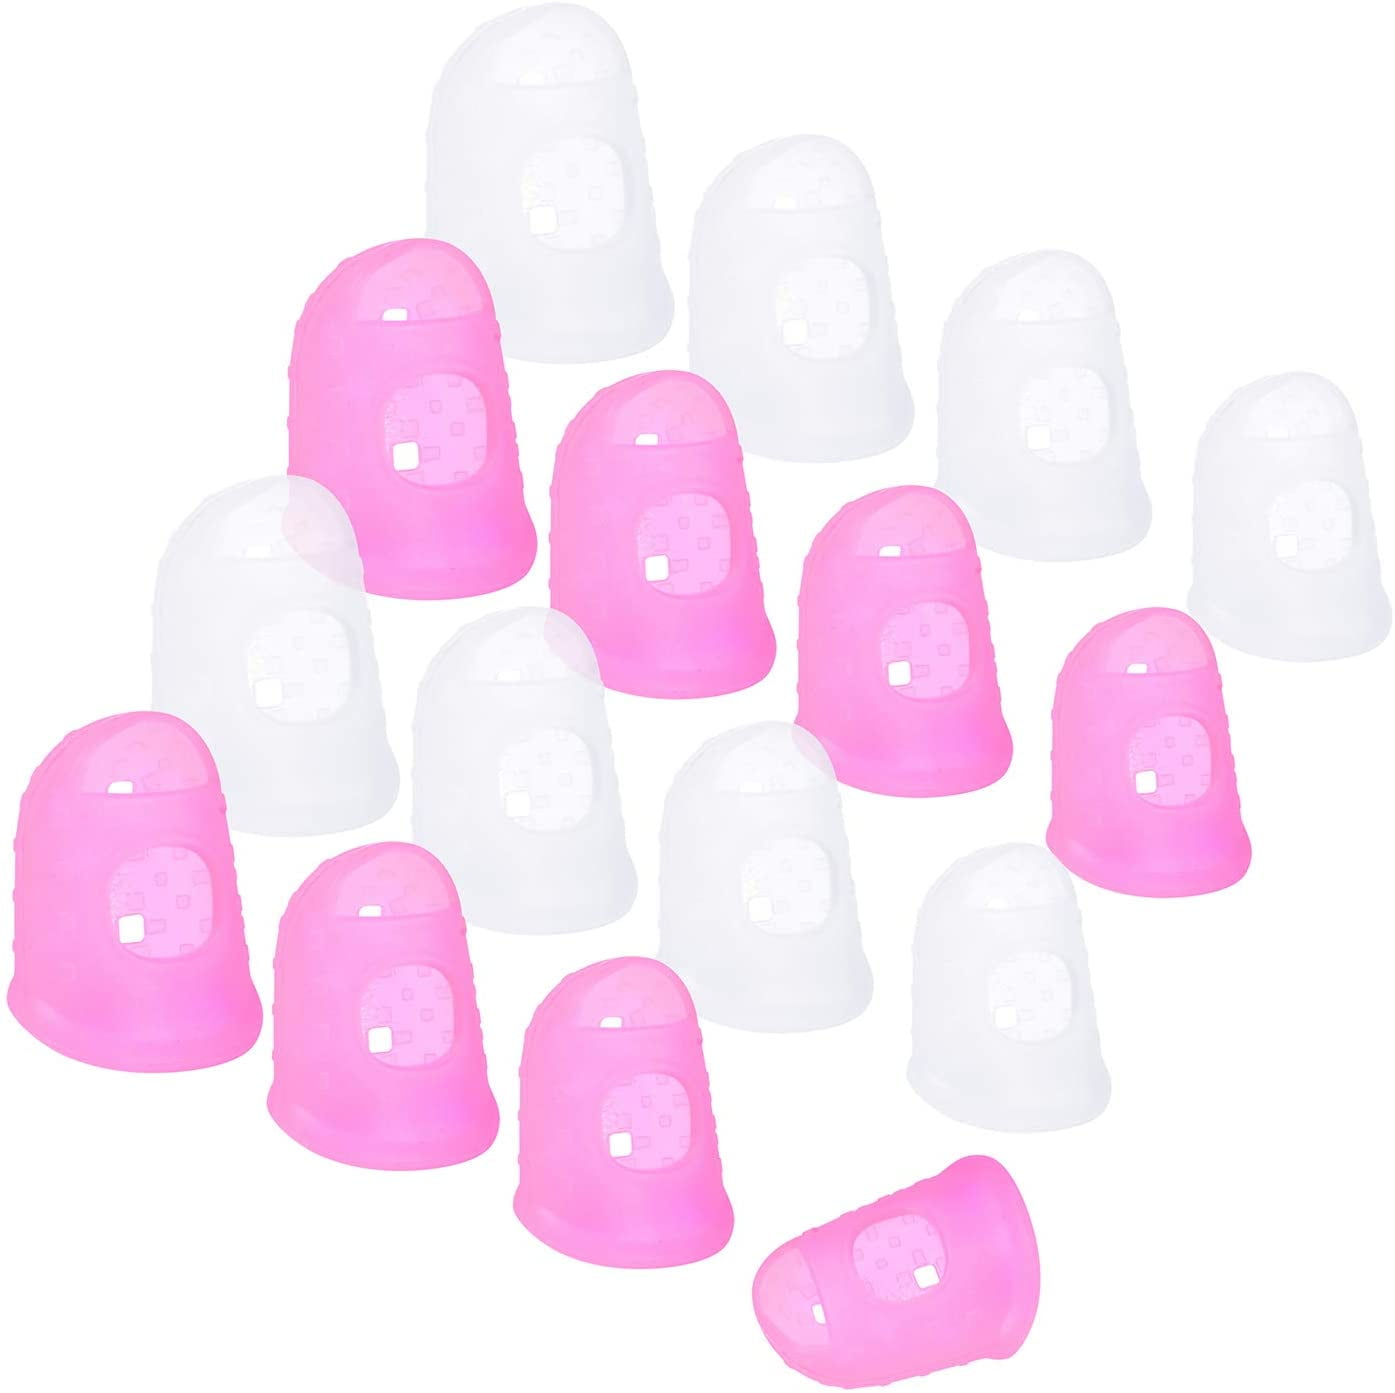 S61110 Size 11 Extra Large Lee Tippi Micro Gel Fingertip Grips 10 Pack 